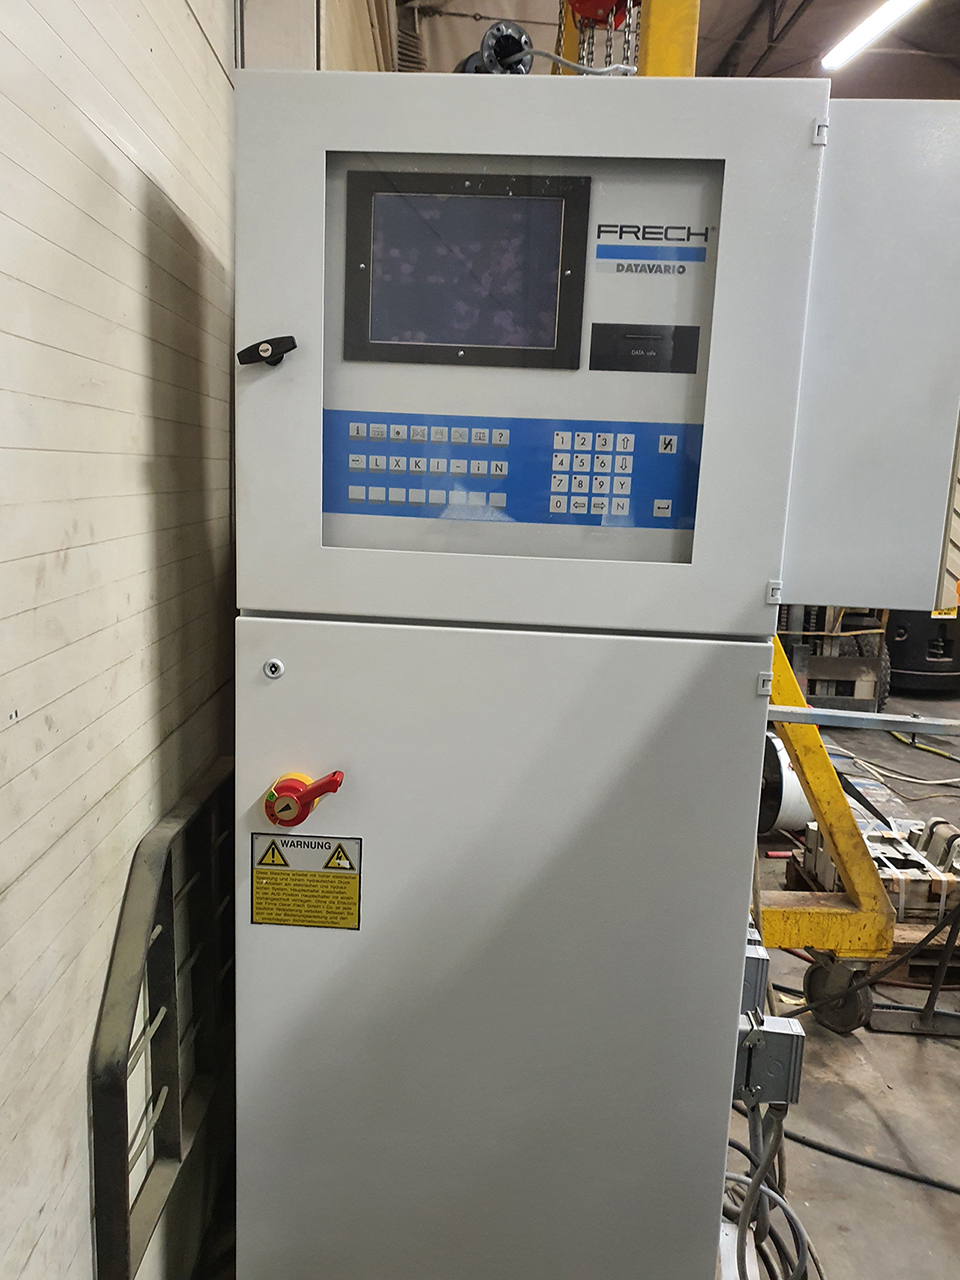 Reconditioning of Frech DAW 20 hot chamber die casting machine